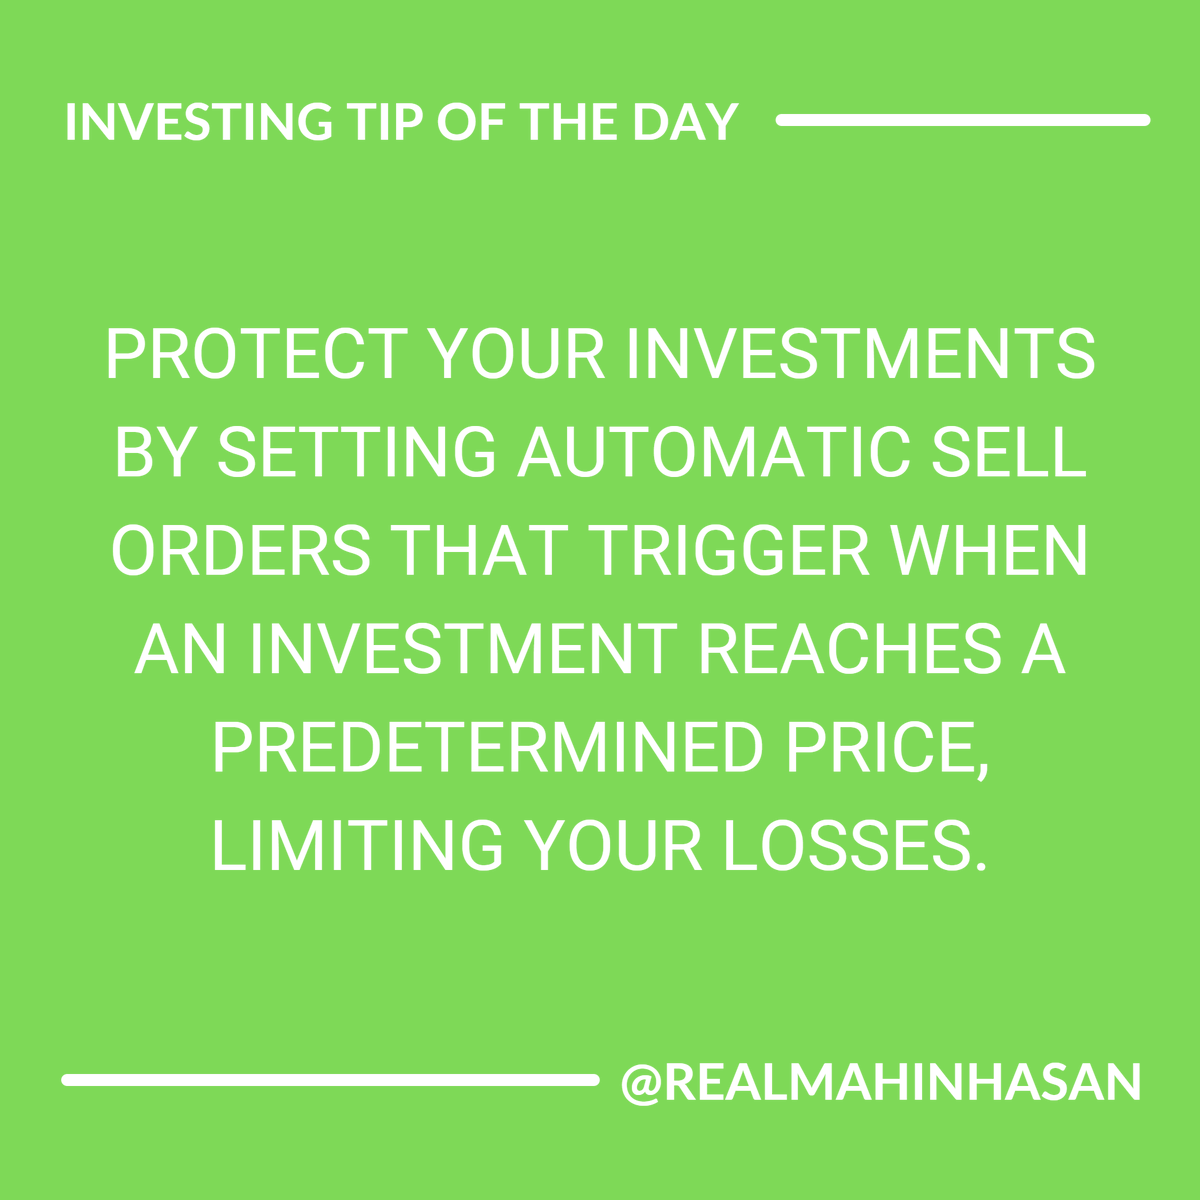 Use stop-loss orders to protect your investments. #StopLossOrders #RiskManagement